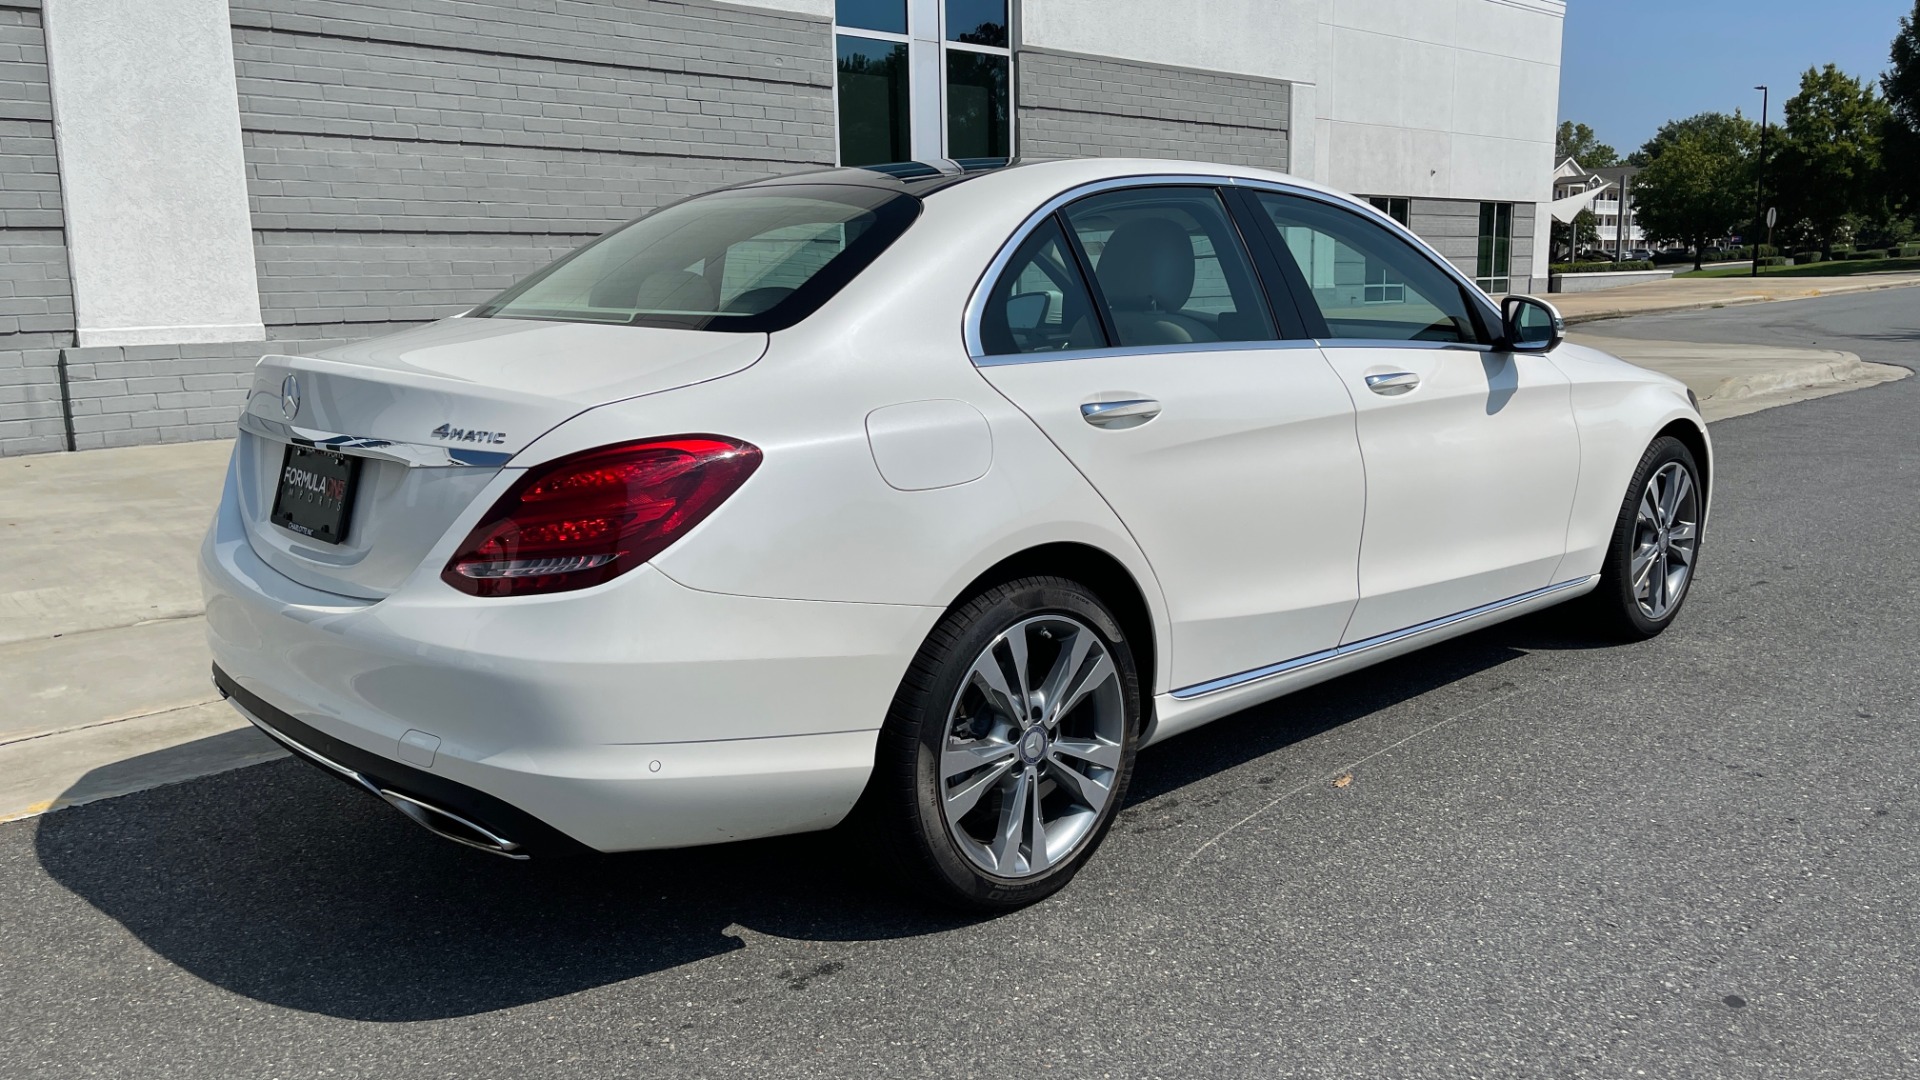 Used 2016 Mercedes-Benz C-CLASS C 300 4MATIC PREMIUM / BSA / MULTI MEDIA PKG / LIGHTING / REARVIEW for sale Sold at Formula Imports in Charlotte NC 28227 2